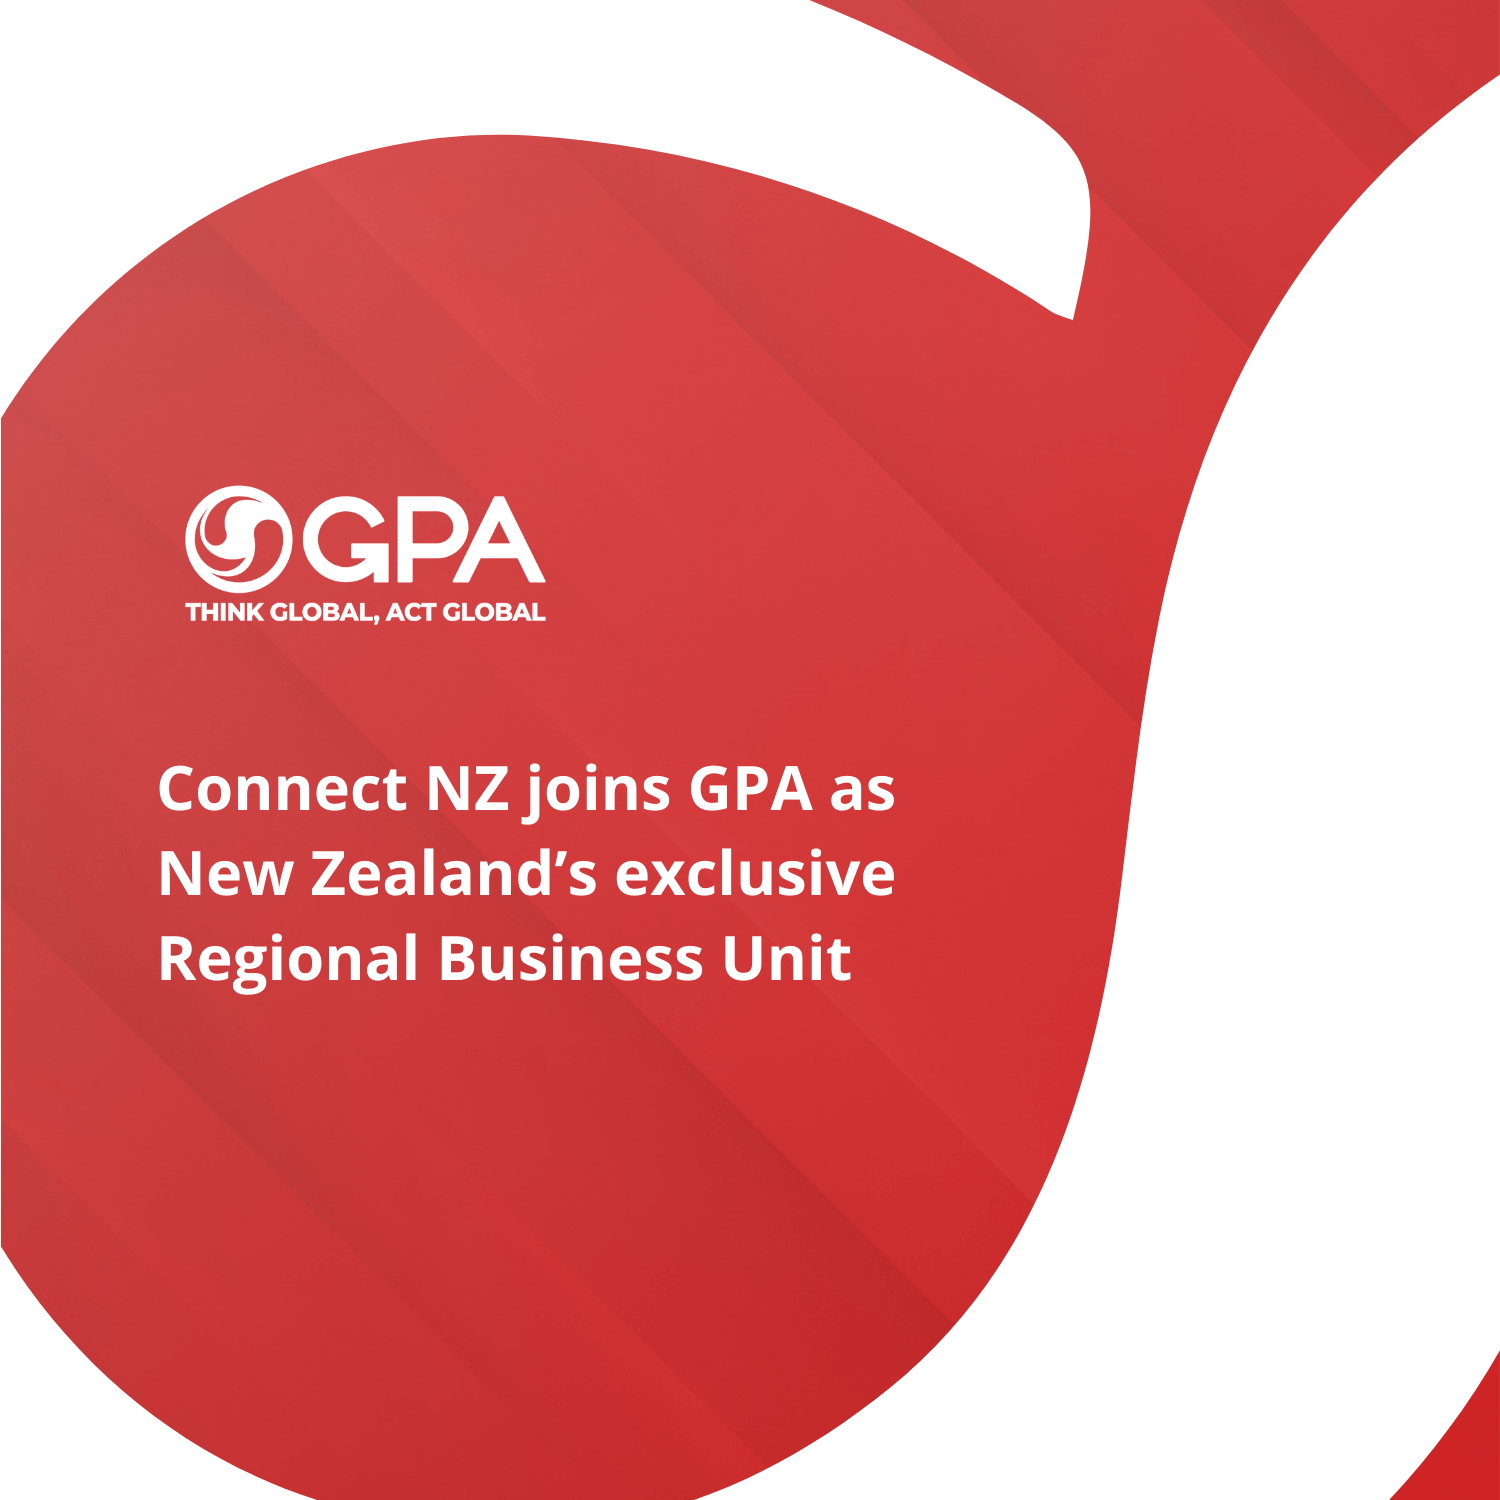 GPA and Connect NZ Partnership